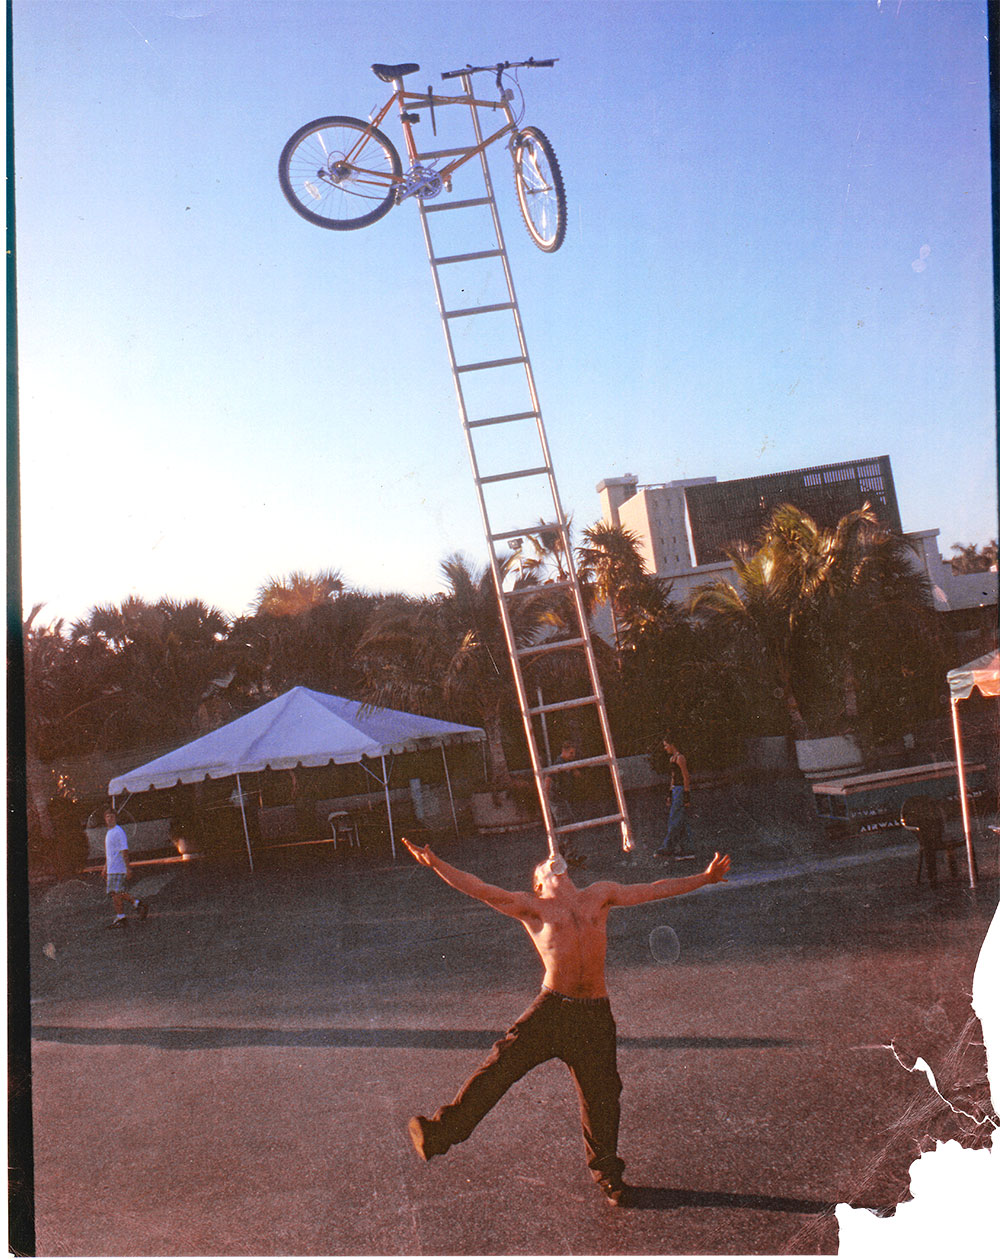 A picture of Steve-O balancing ladder and bike on his chin. A shirtless white man with one foot on the ground and arms open wide balances a bike on top of a ladder on his chin.